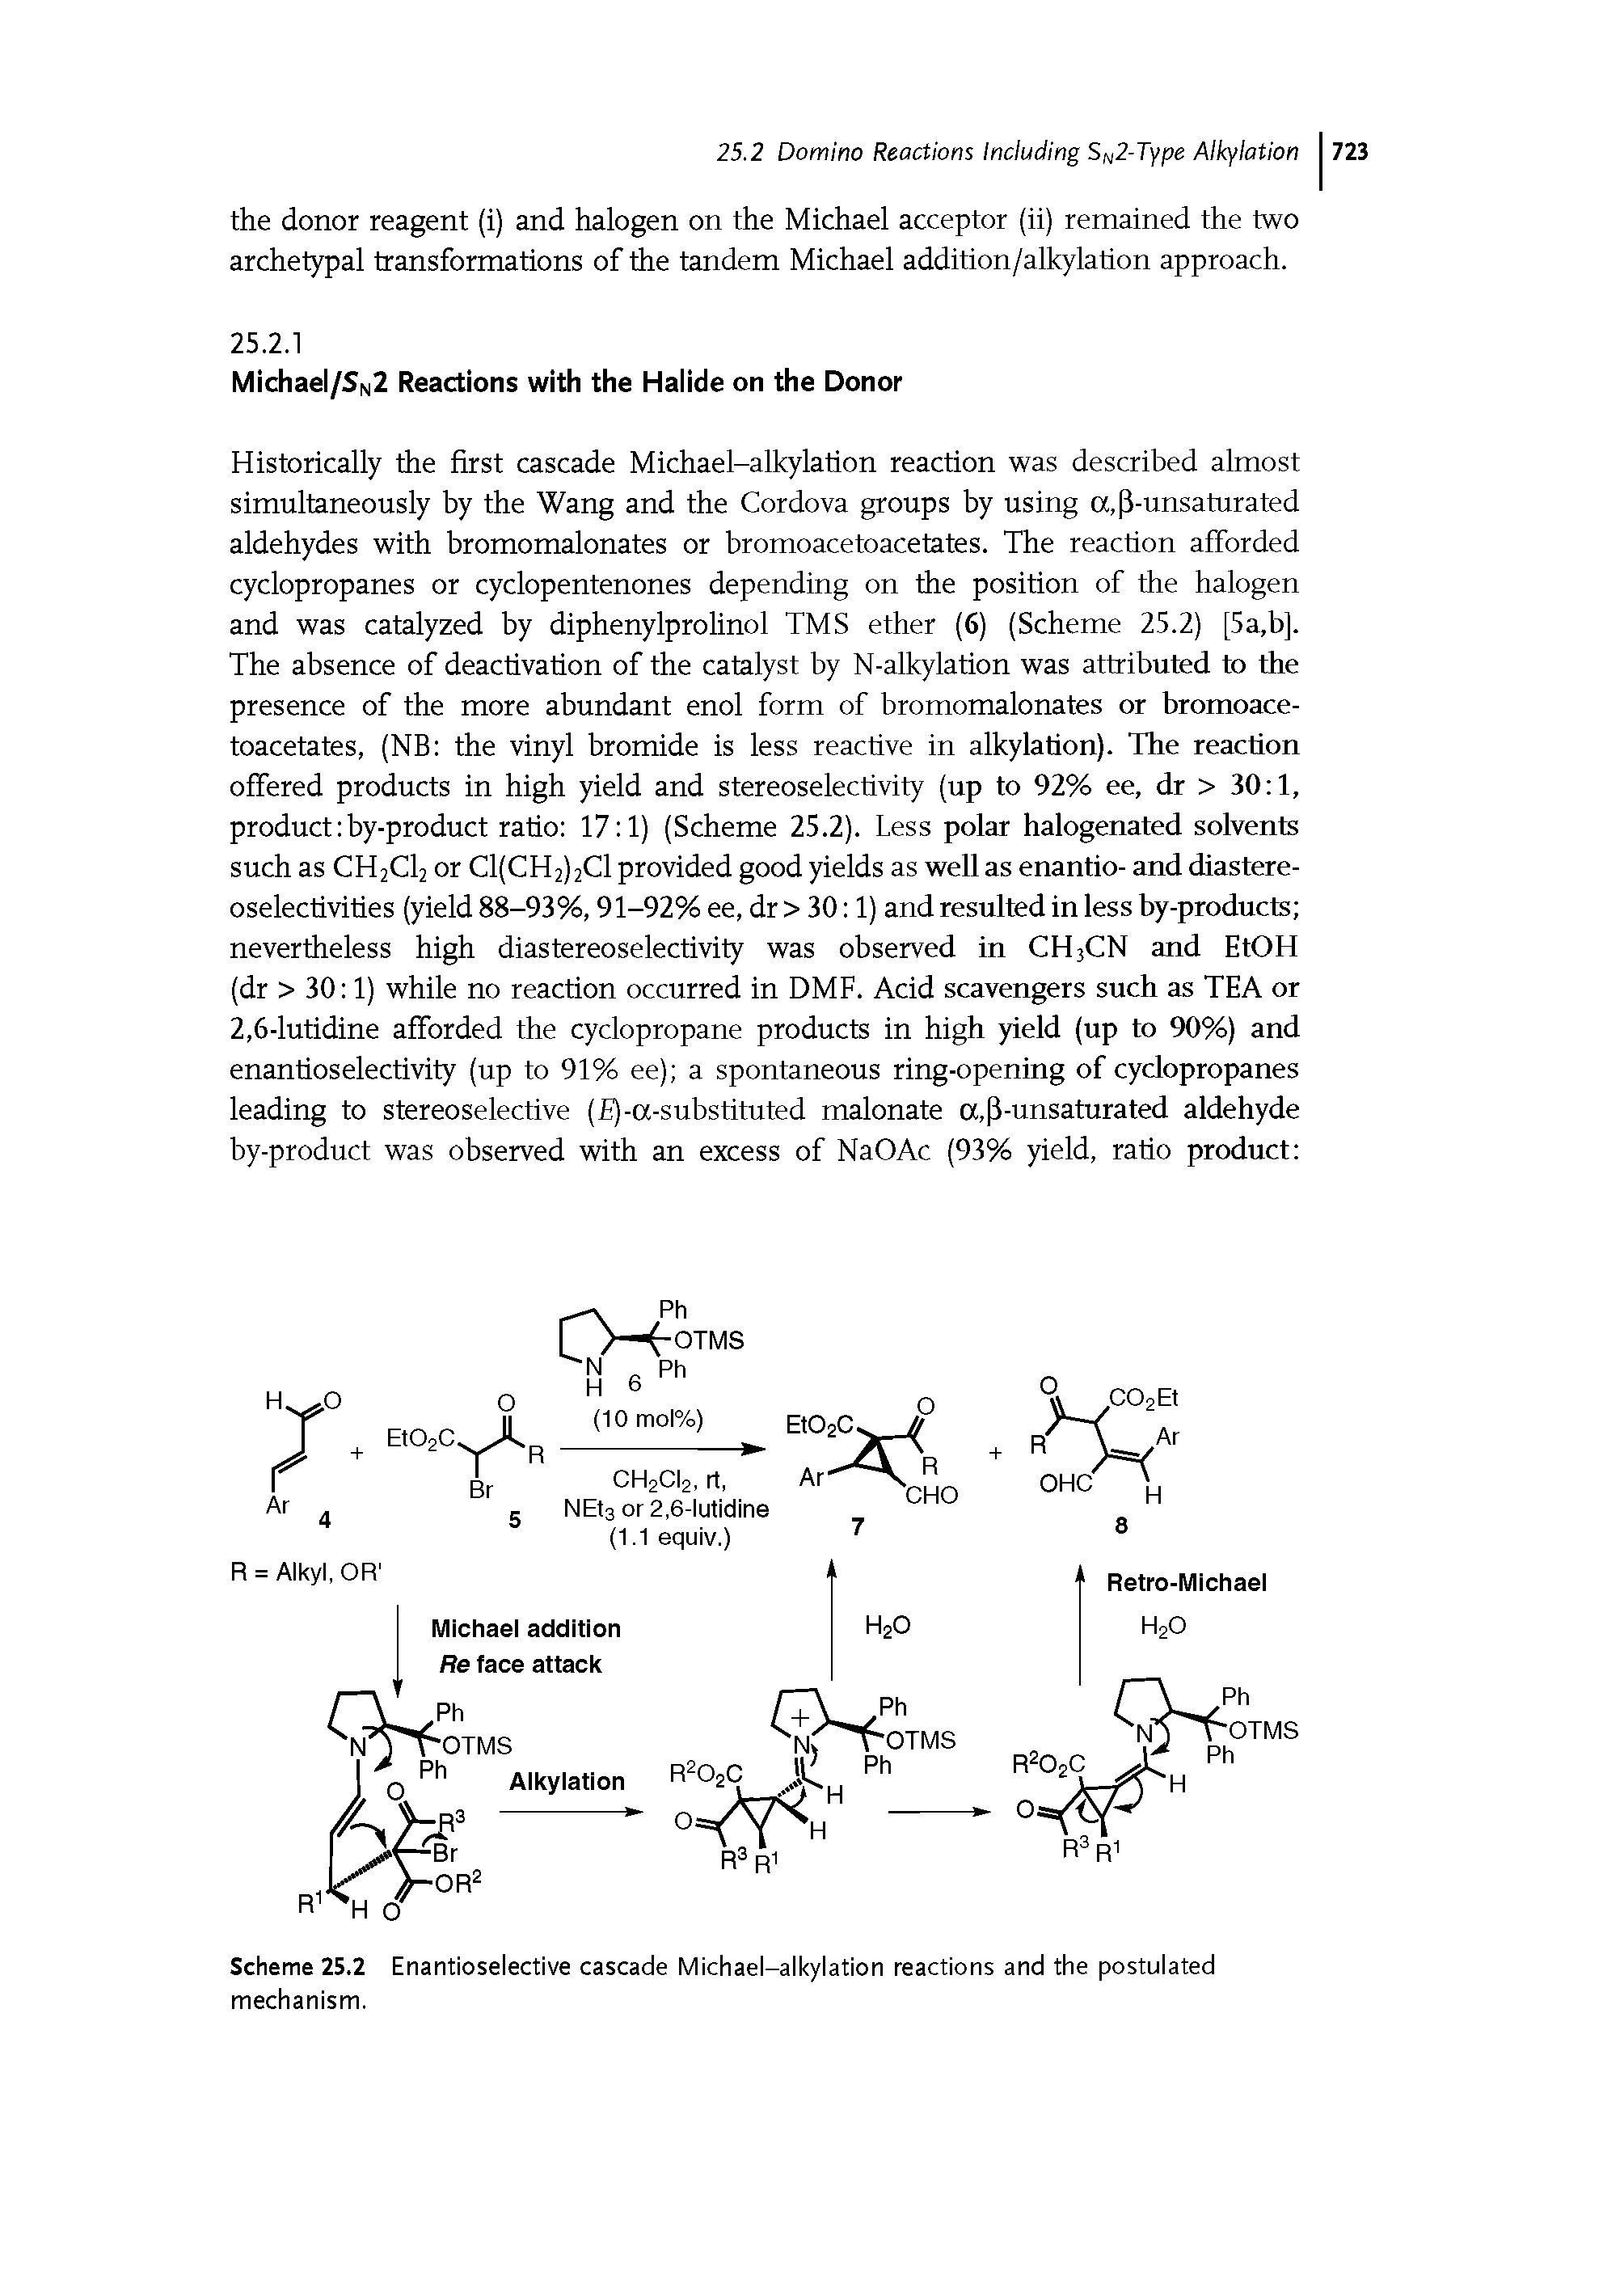 Scheme 25.2 Enantioselective cascade Michael-alkylation reactions and the postulated mechanism.